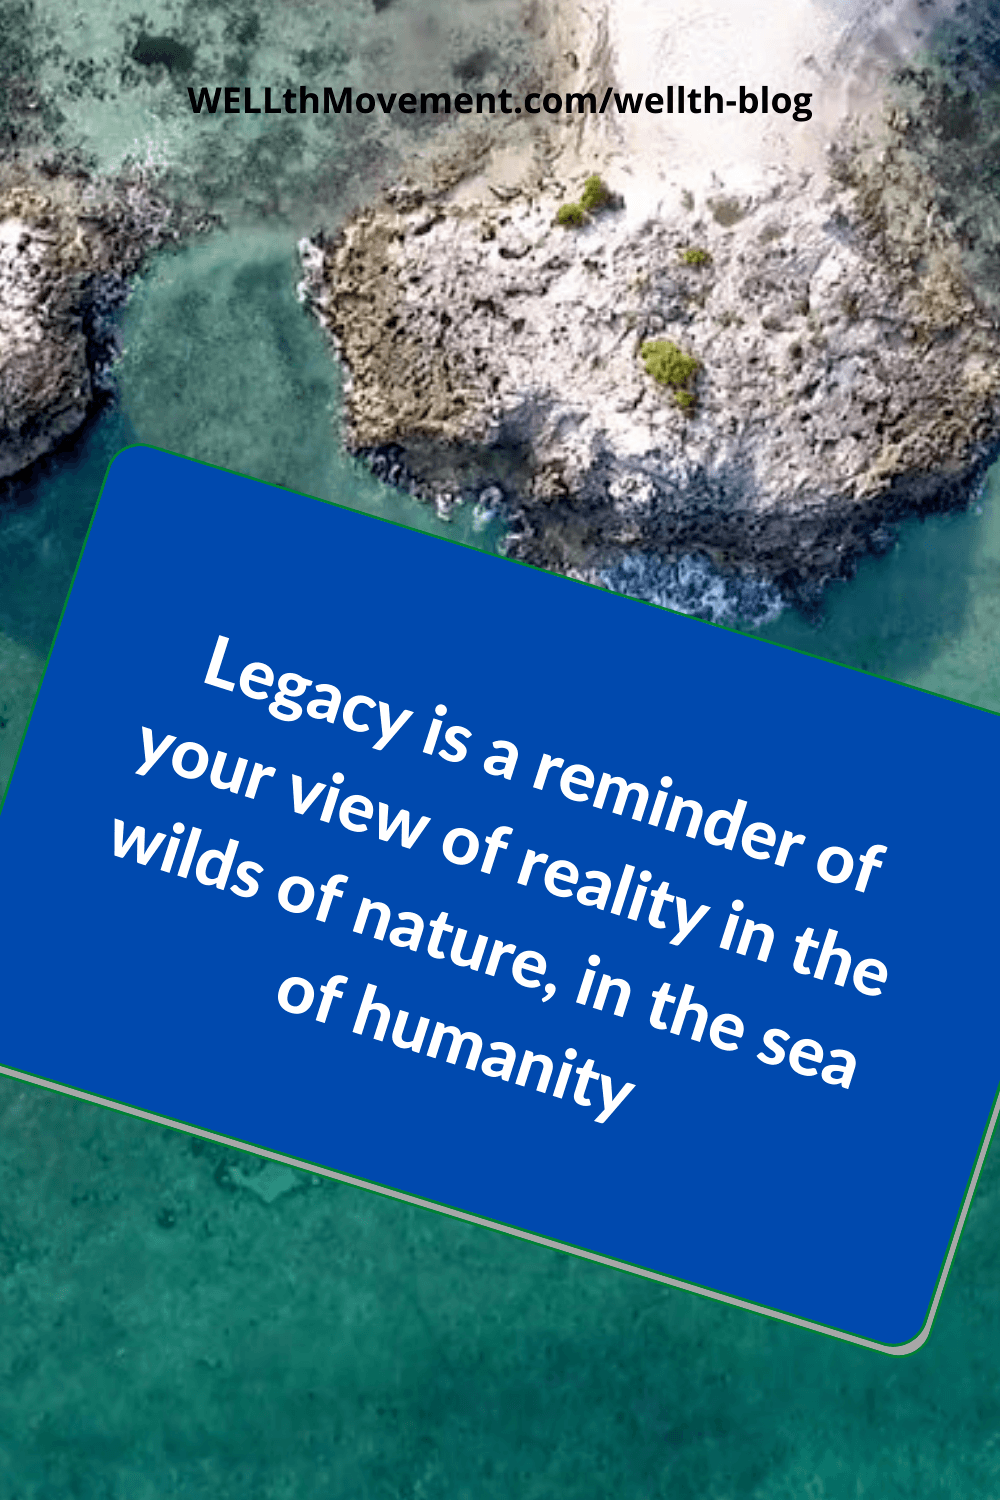 Legacy Project Wilds Nature Sea Humanity